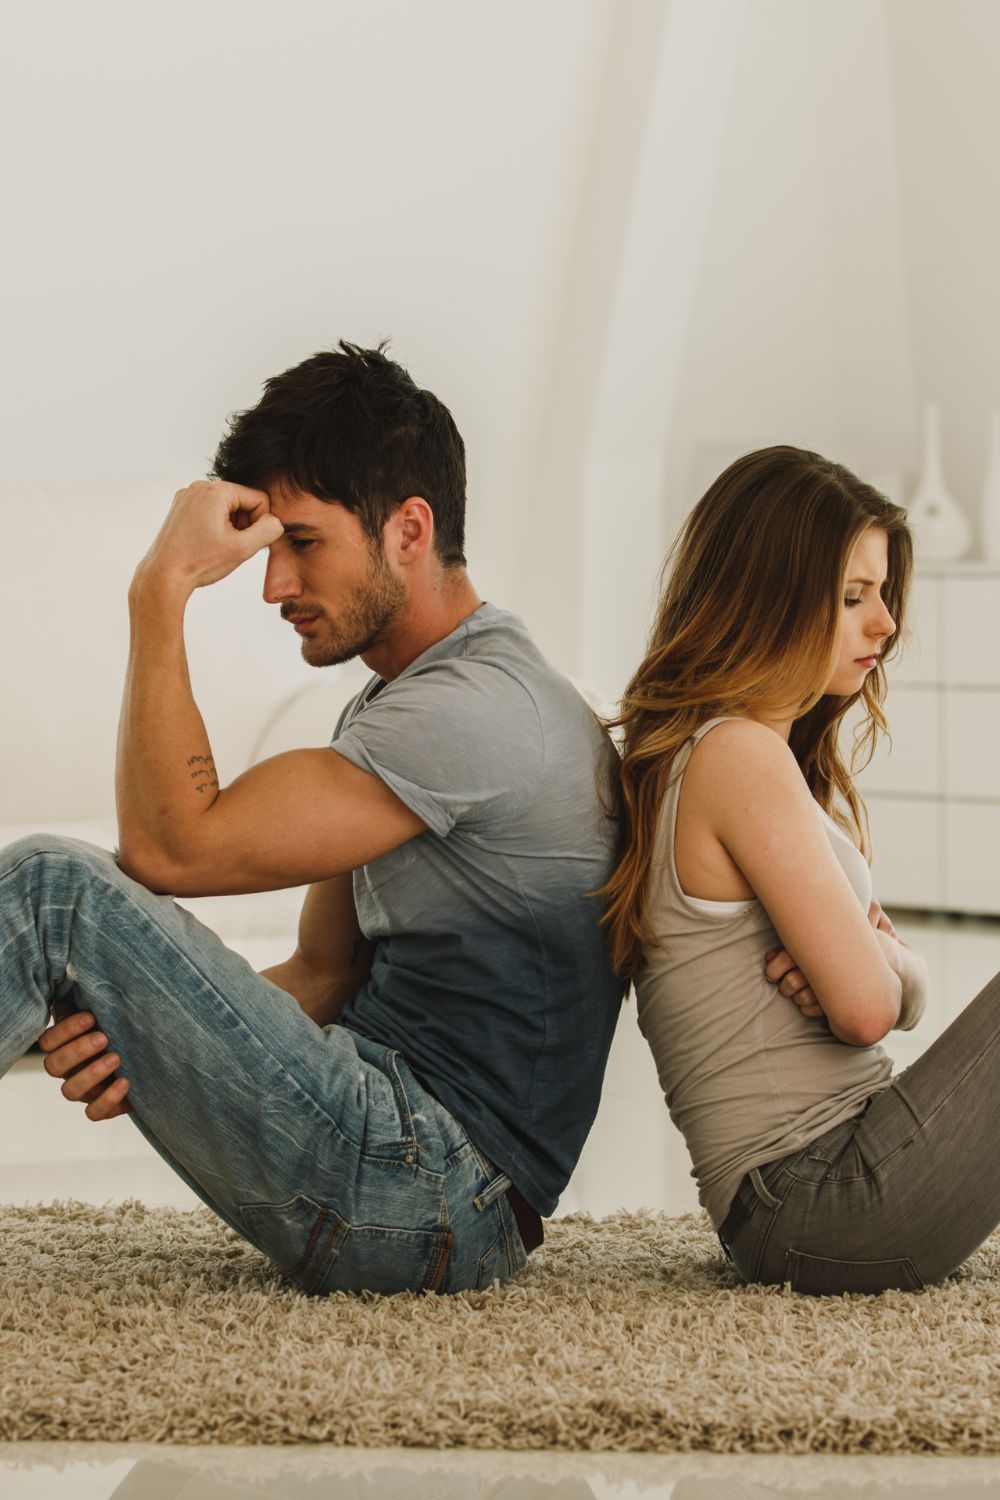 Things a Married Man Should Never Allow to Come Between Him and His Spouse